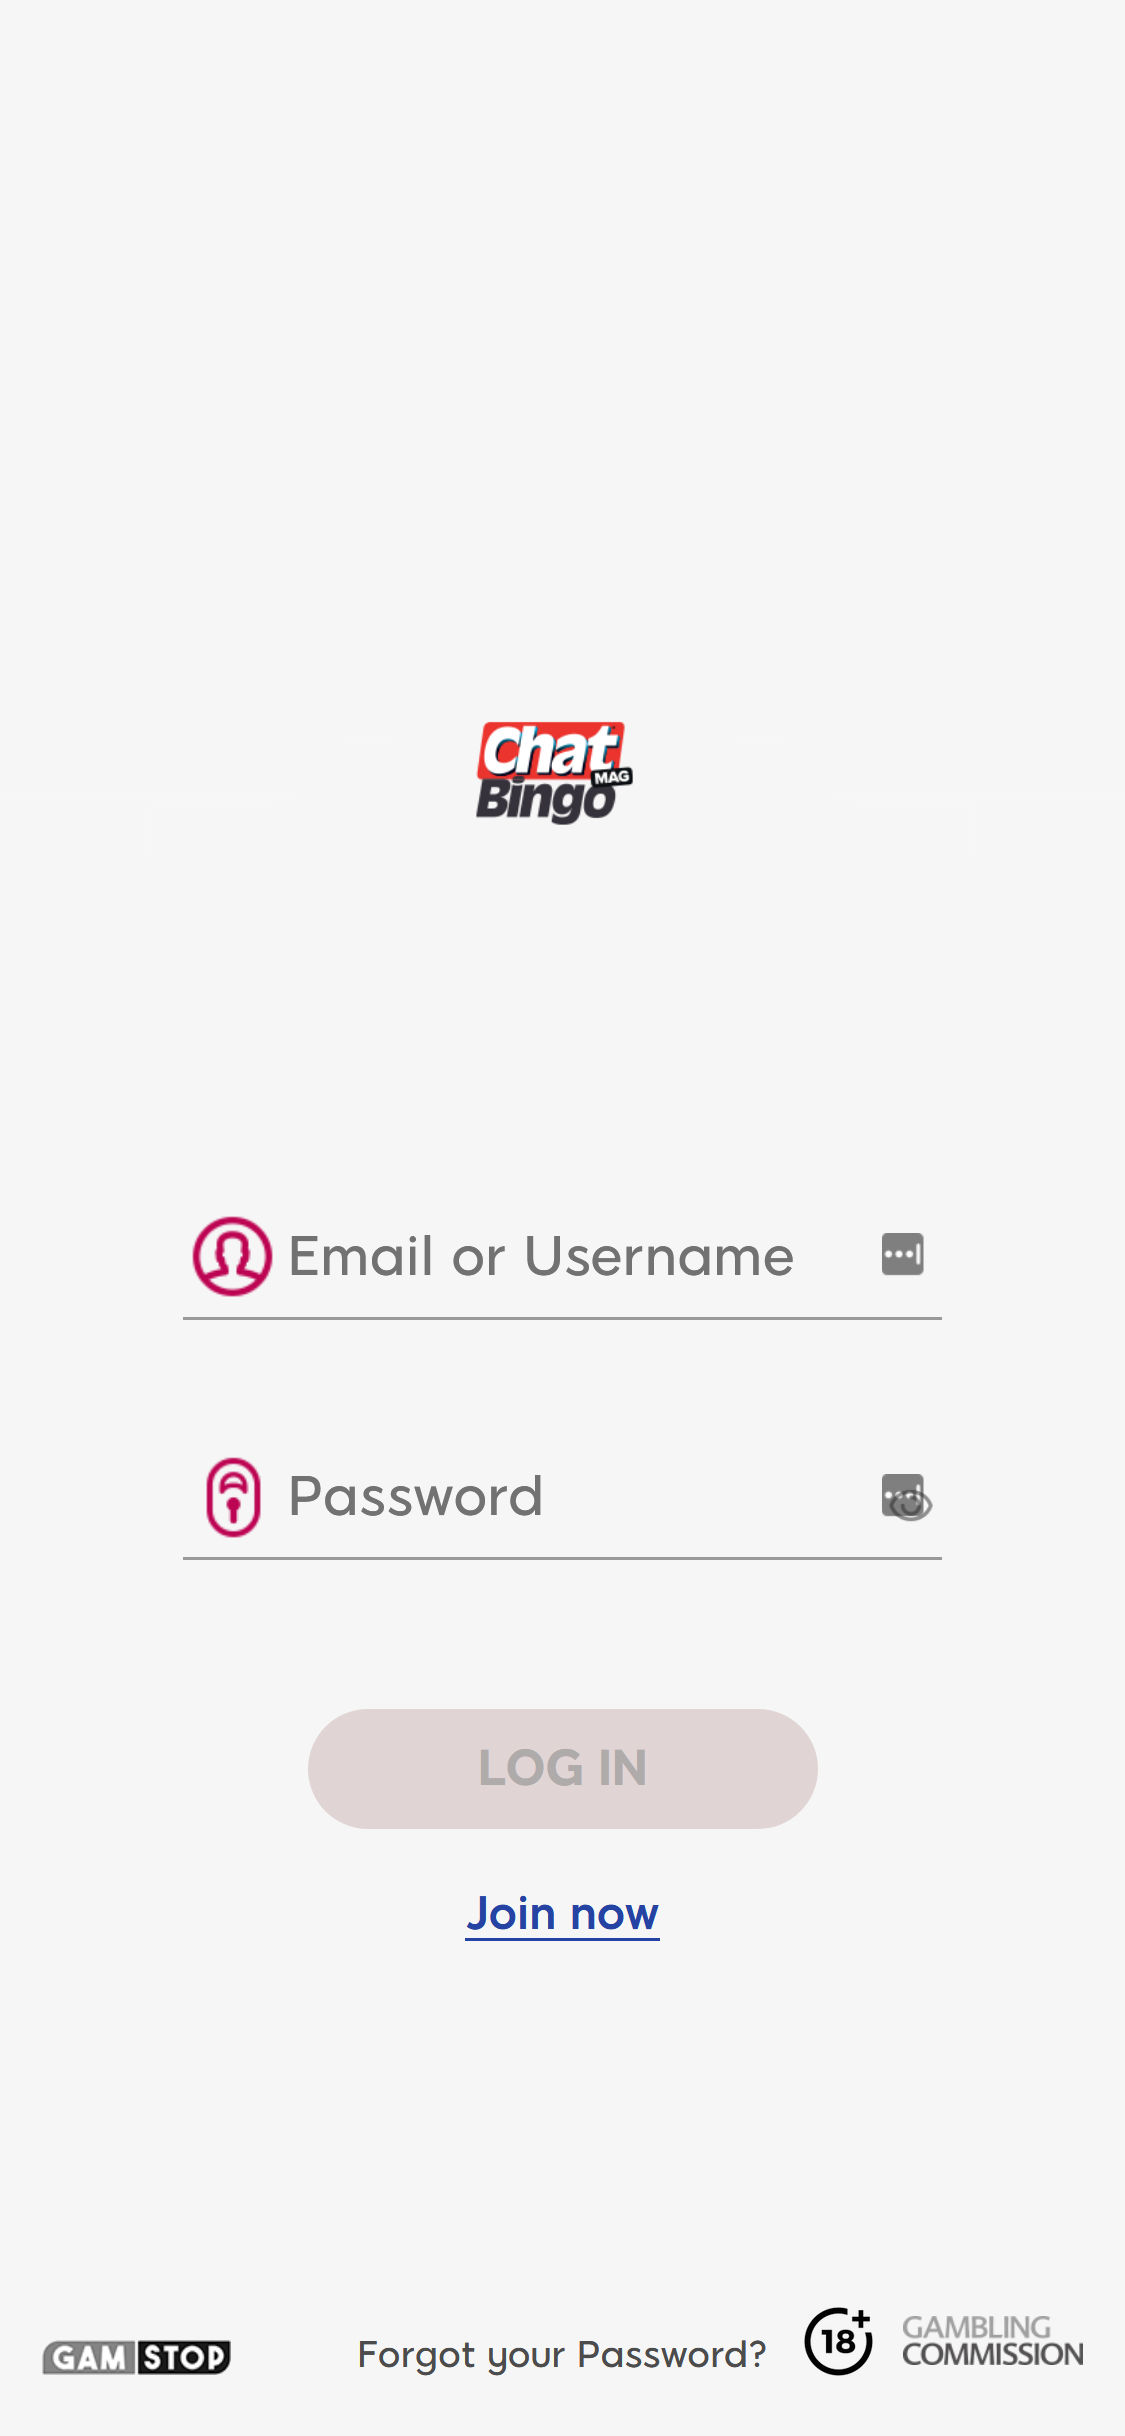 Chat Magbingo Casino Mobile Login Review